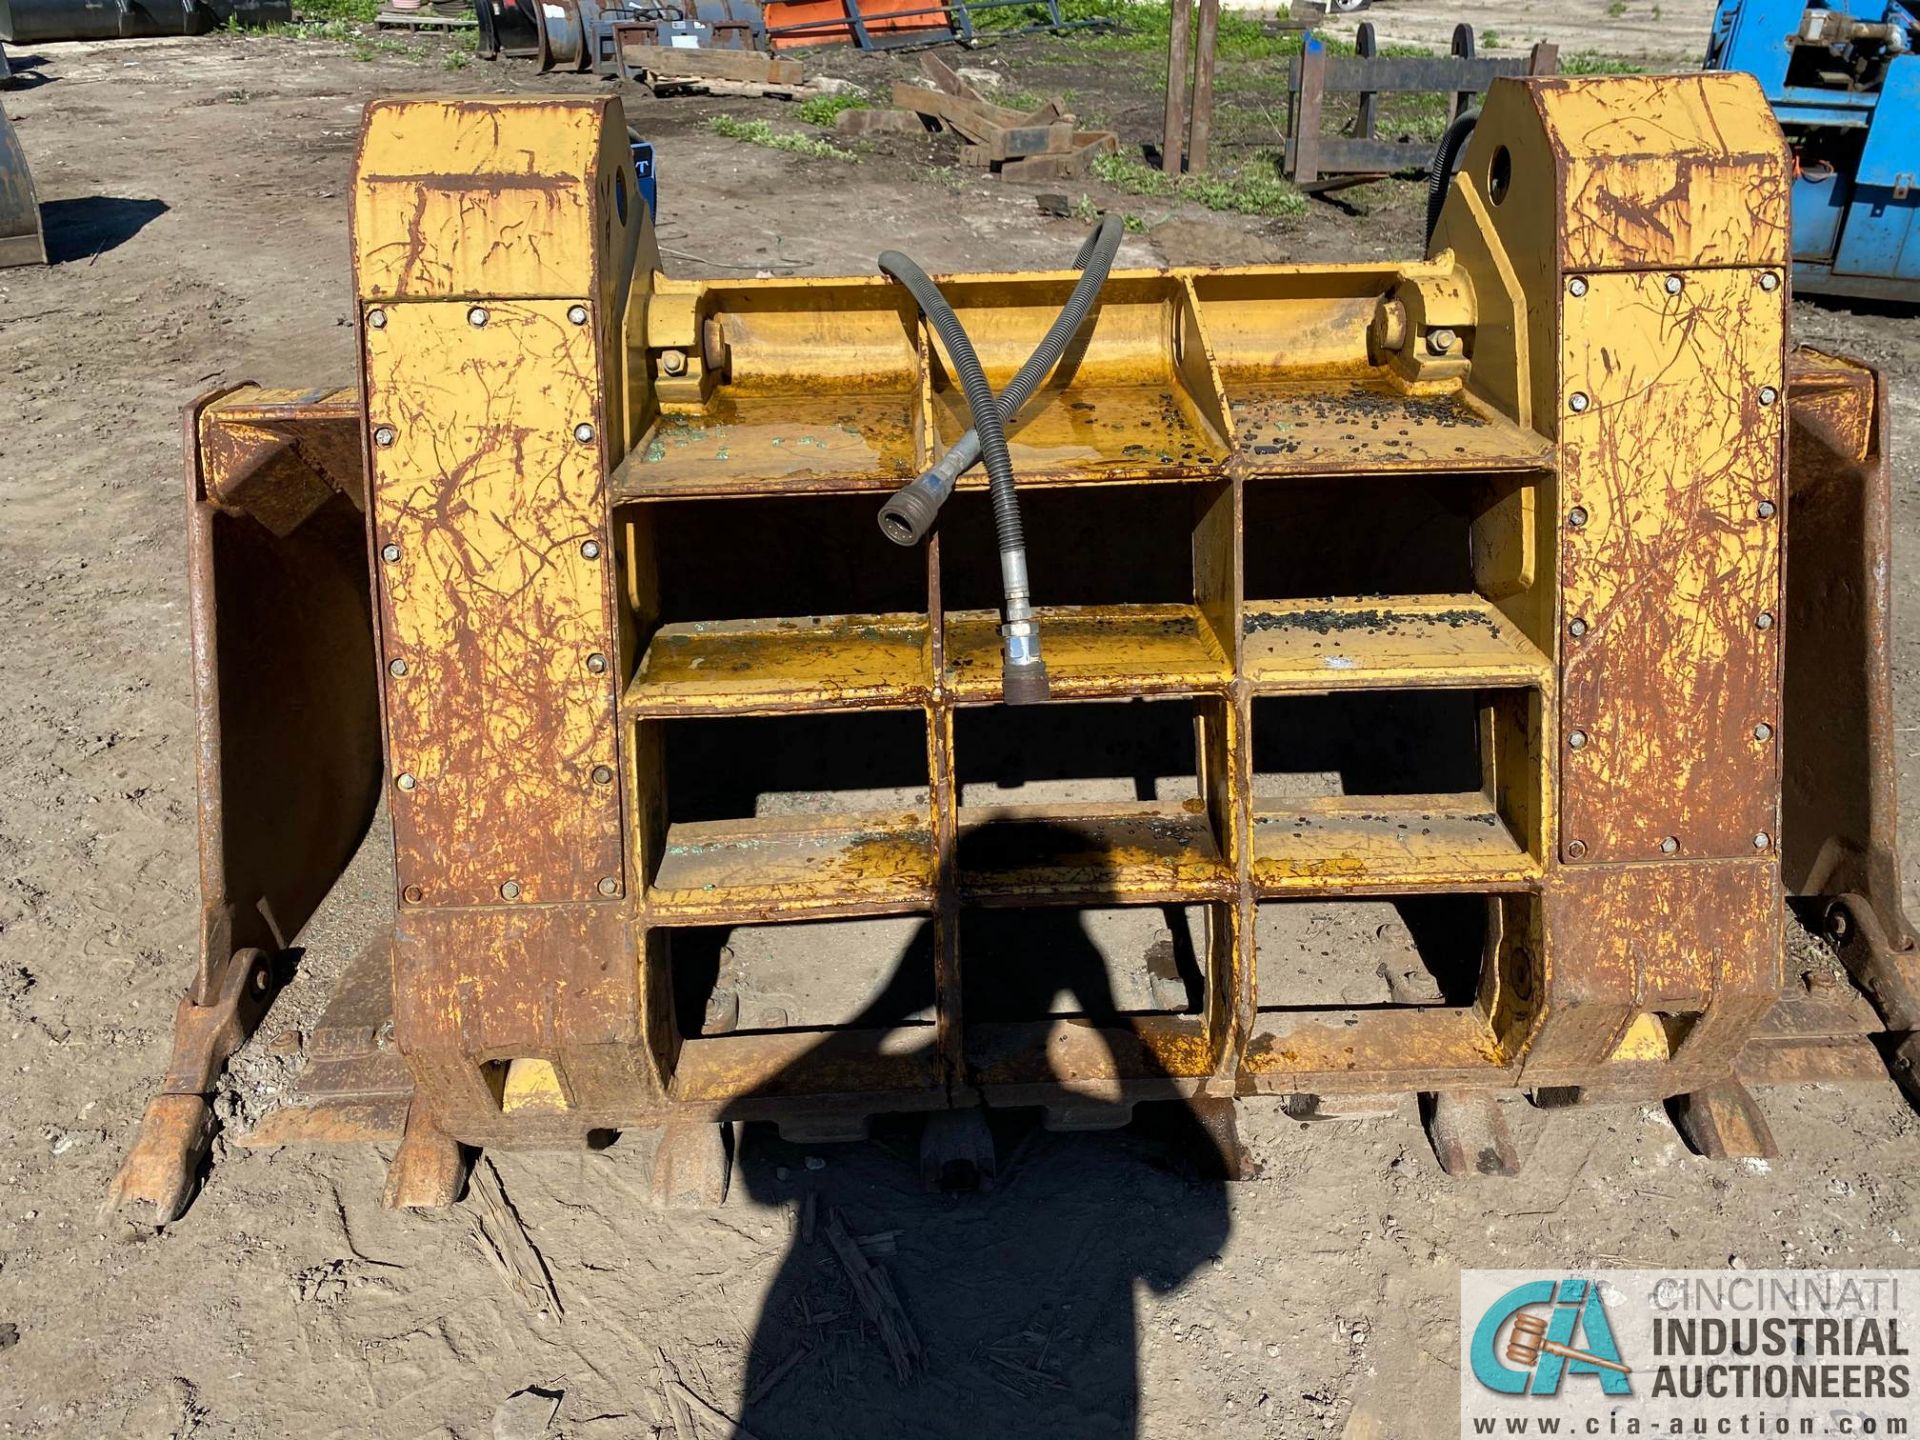 92" ALLIED GATOR MODEL 1661A HYDRAULIC LOADER BUCKET WITH GRAPPLER ATTACHMENT - Image 2 of 5